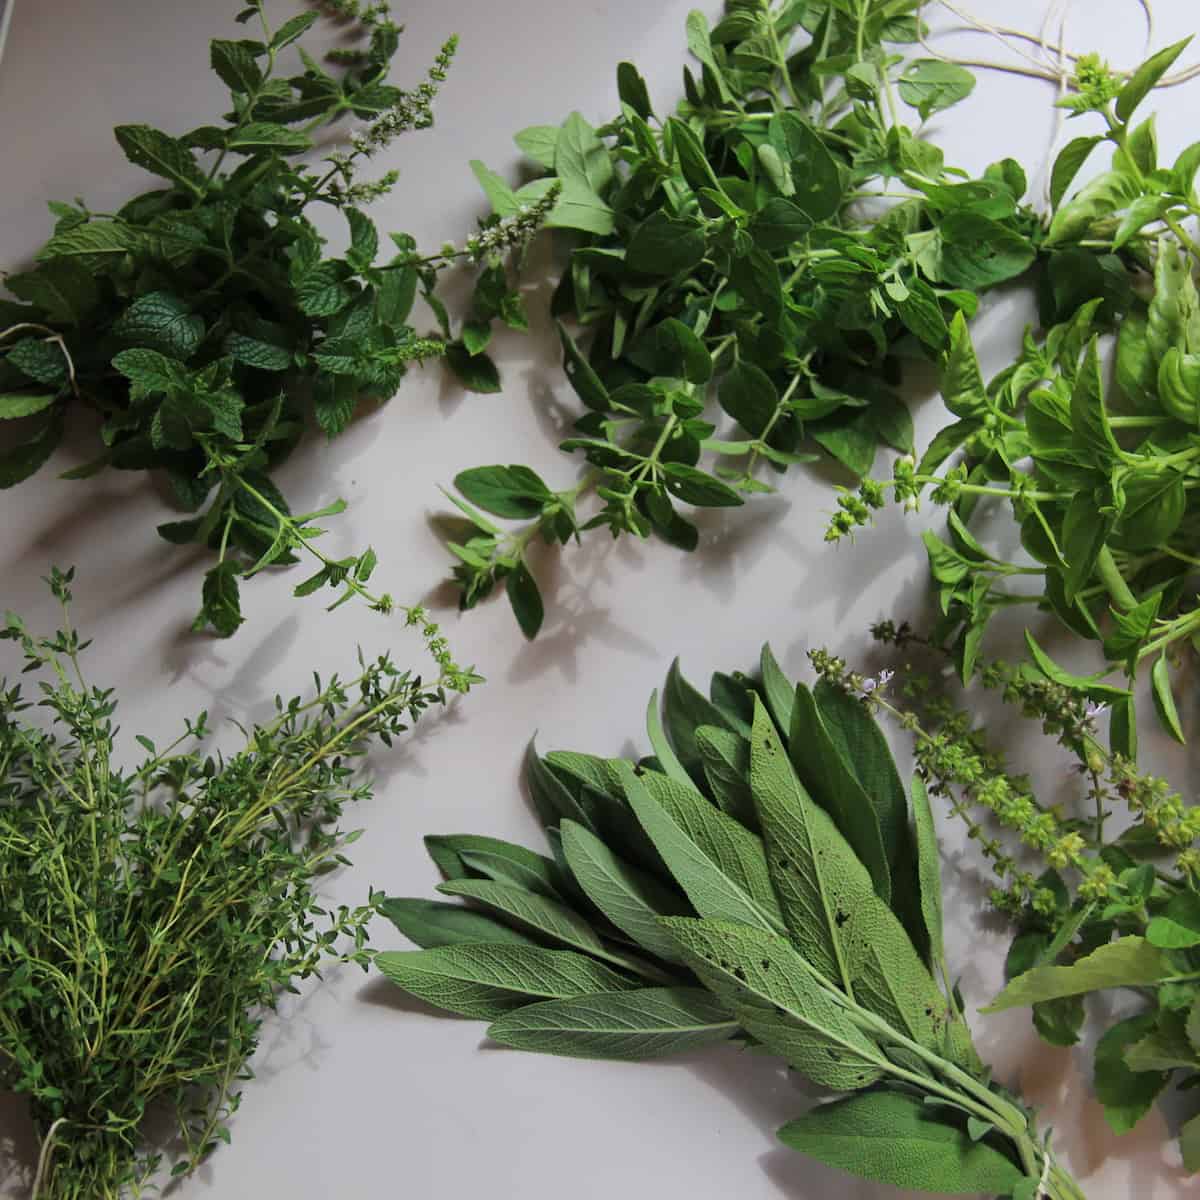 Culinary herbs on the kitchen countertop